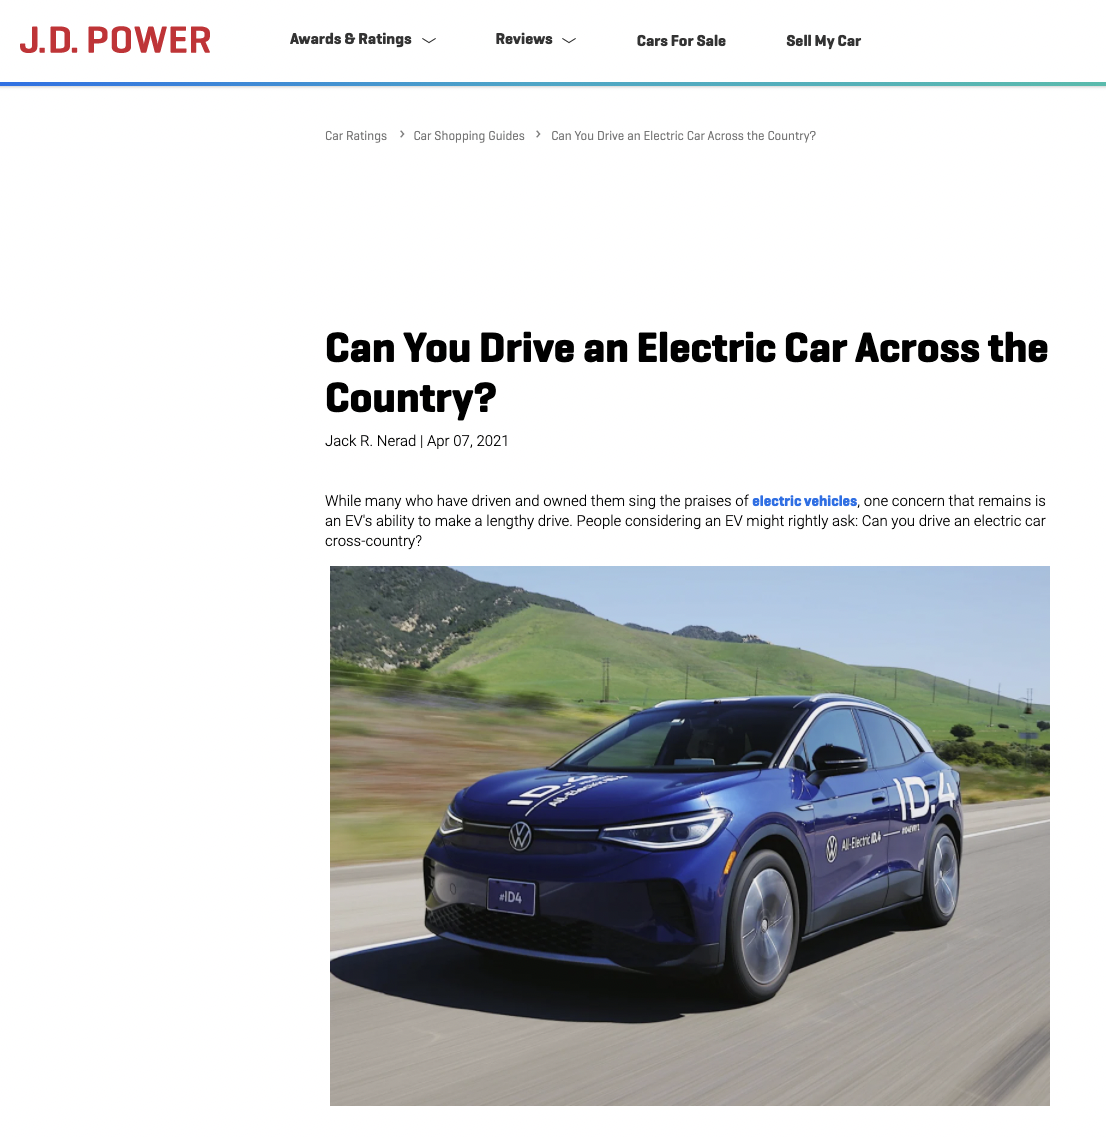 Can You Drive an Electric Car Across the Country?